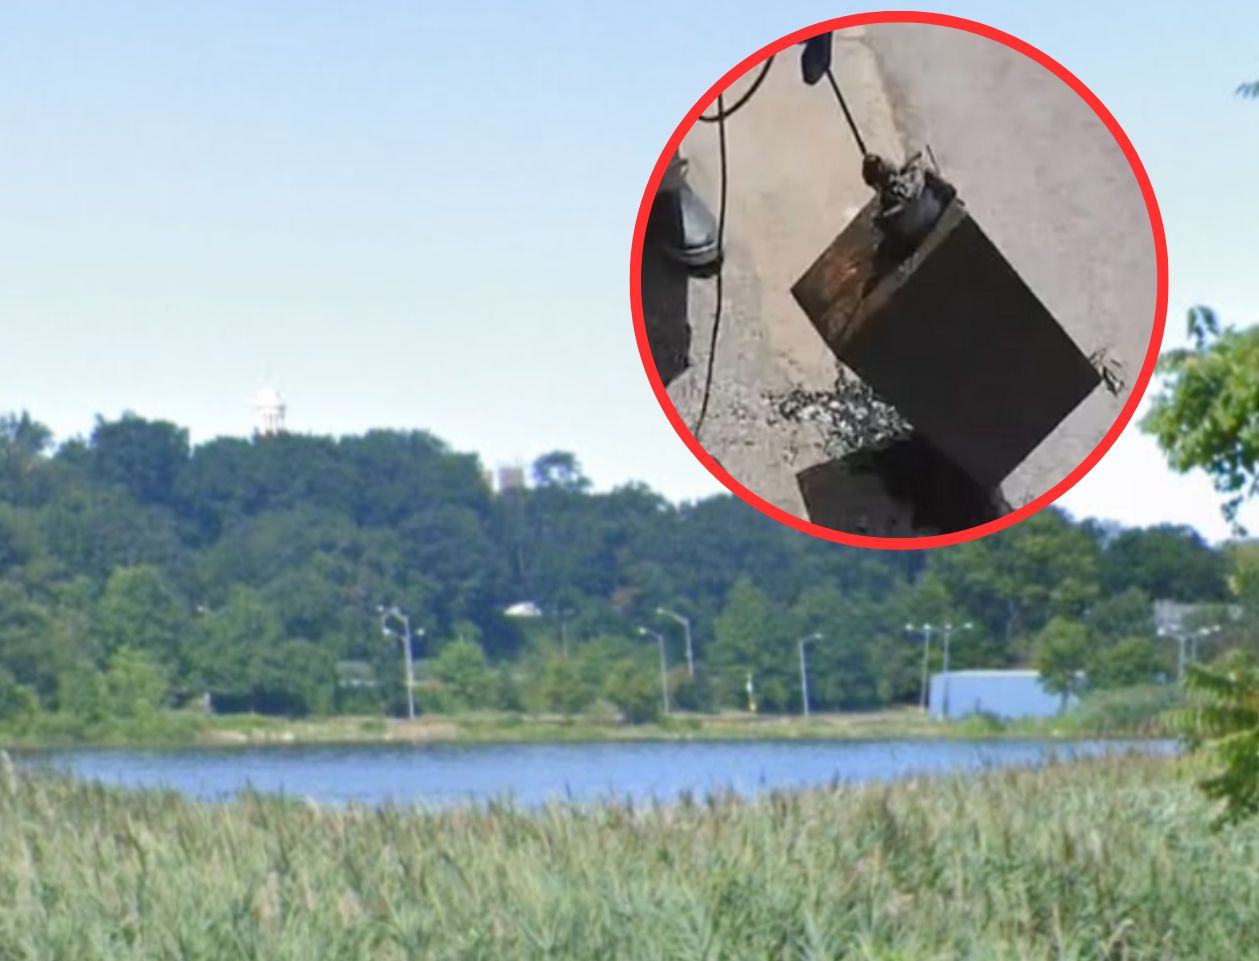 Fishers find $100,000 in lake safe at Flushing Meadows Park